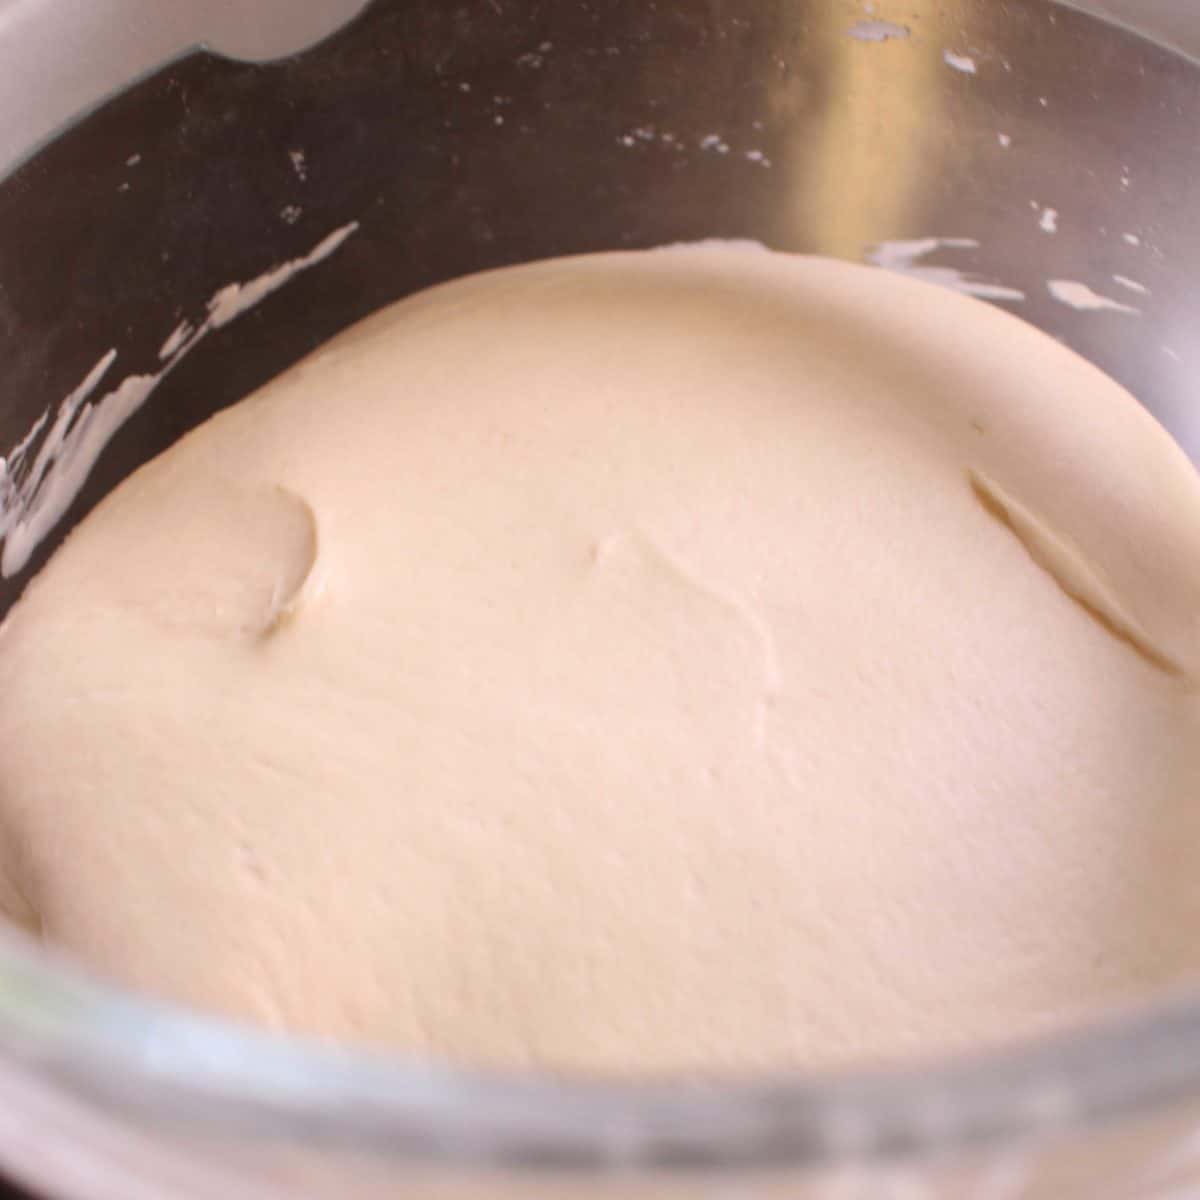 bread dough in a bowl after the first rise.